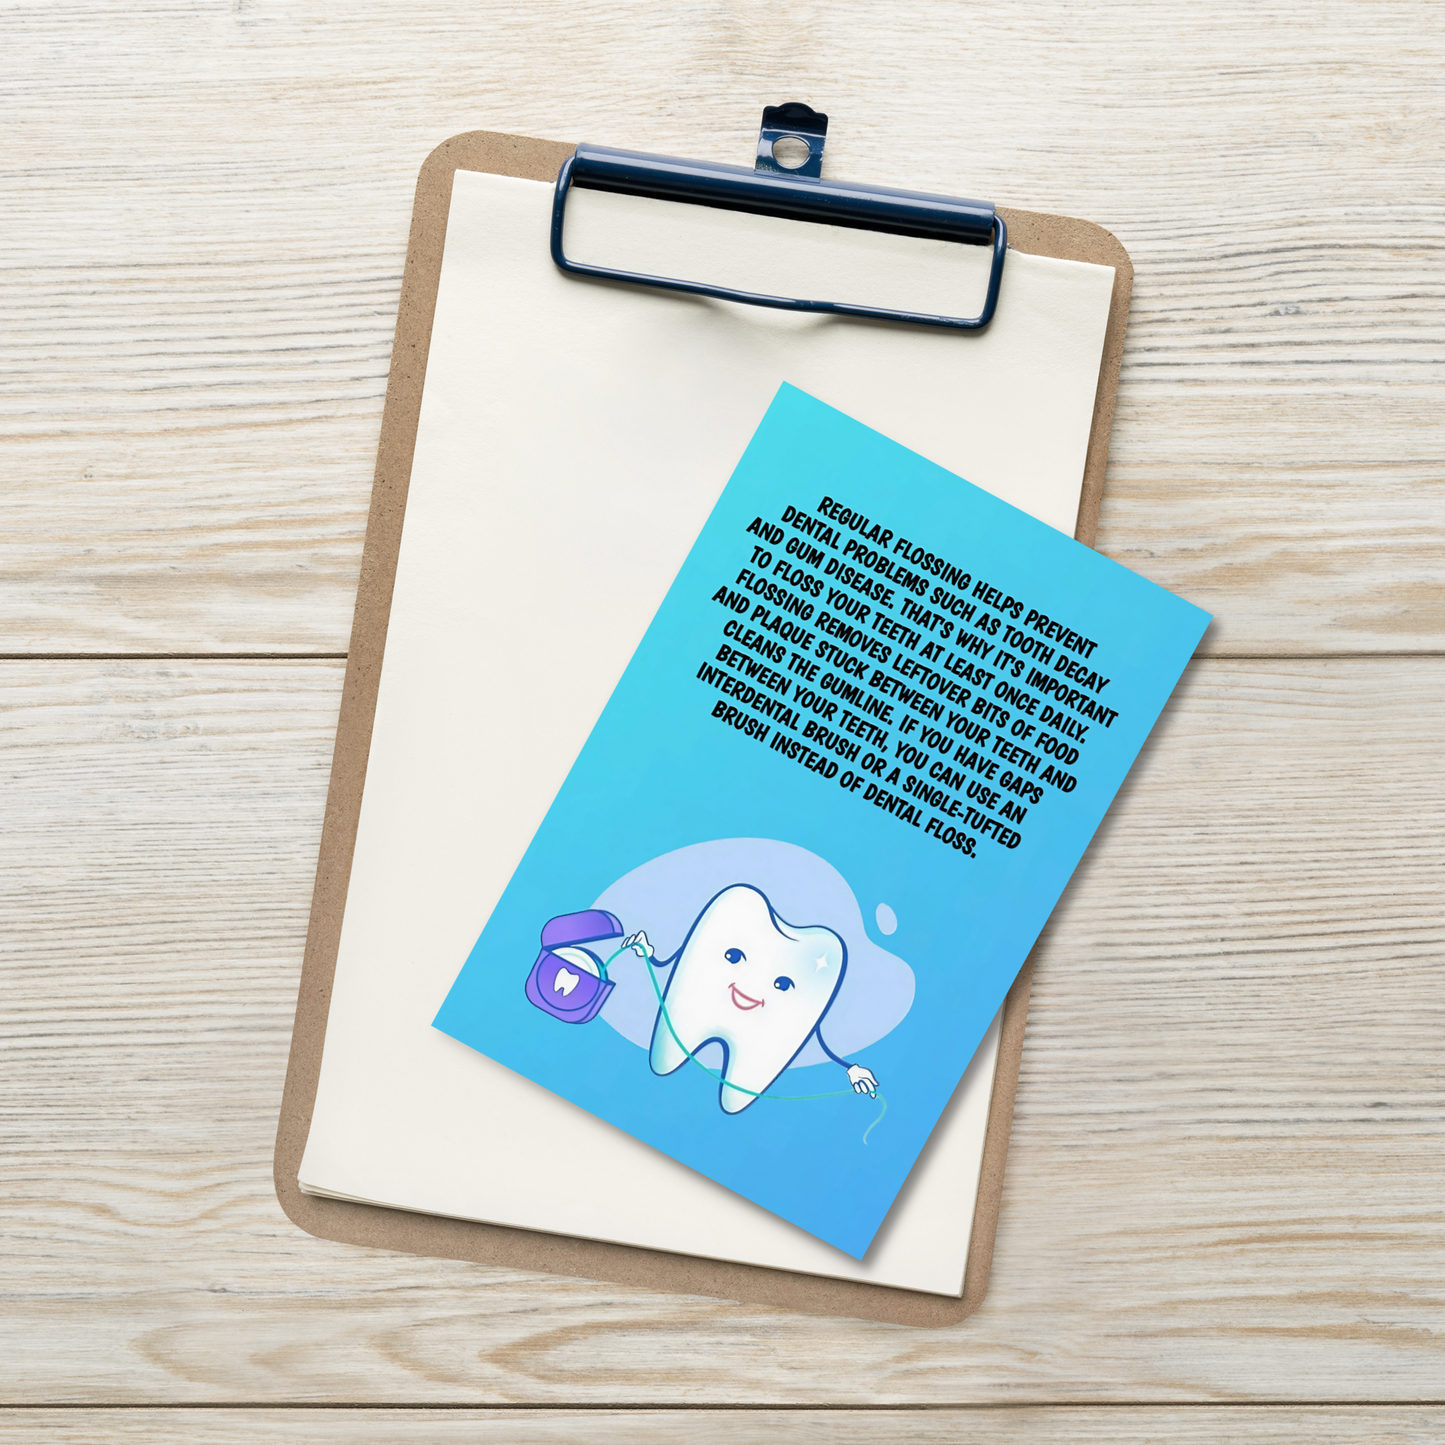 Oral Hygiene Cards- Regular Flossing Helps Prevent Dental Problens Such As Tooth Decay And Gum Disease